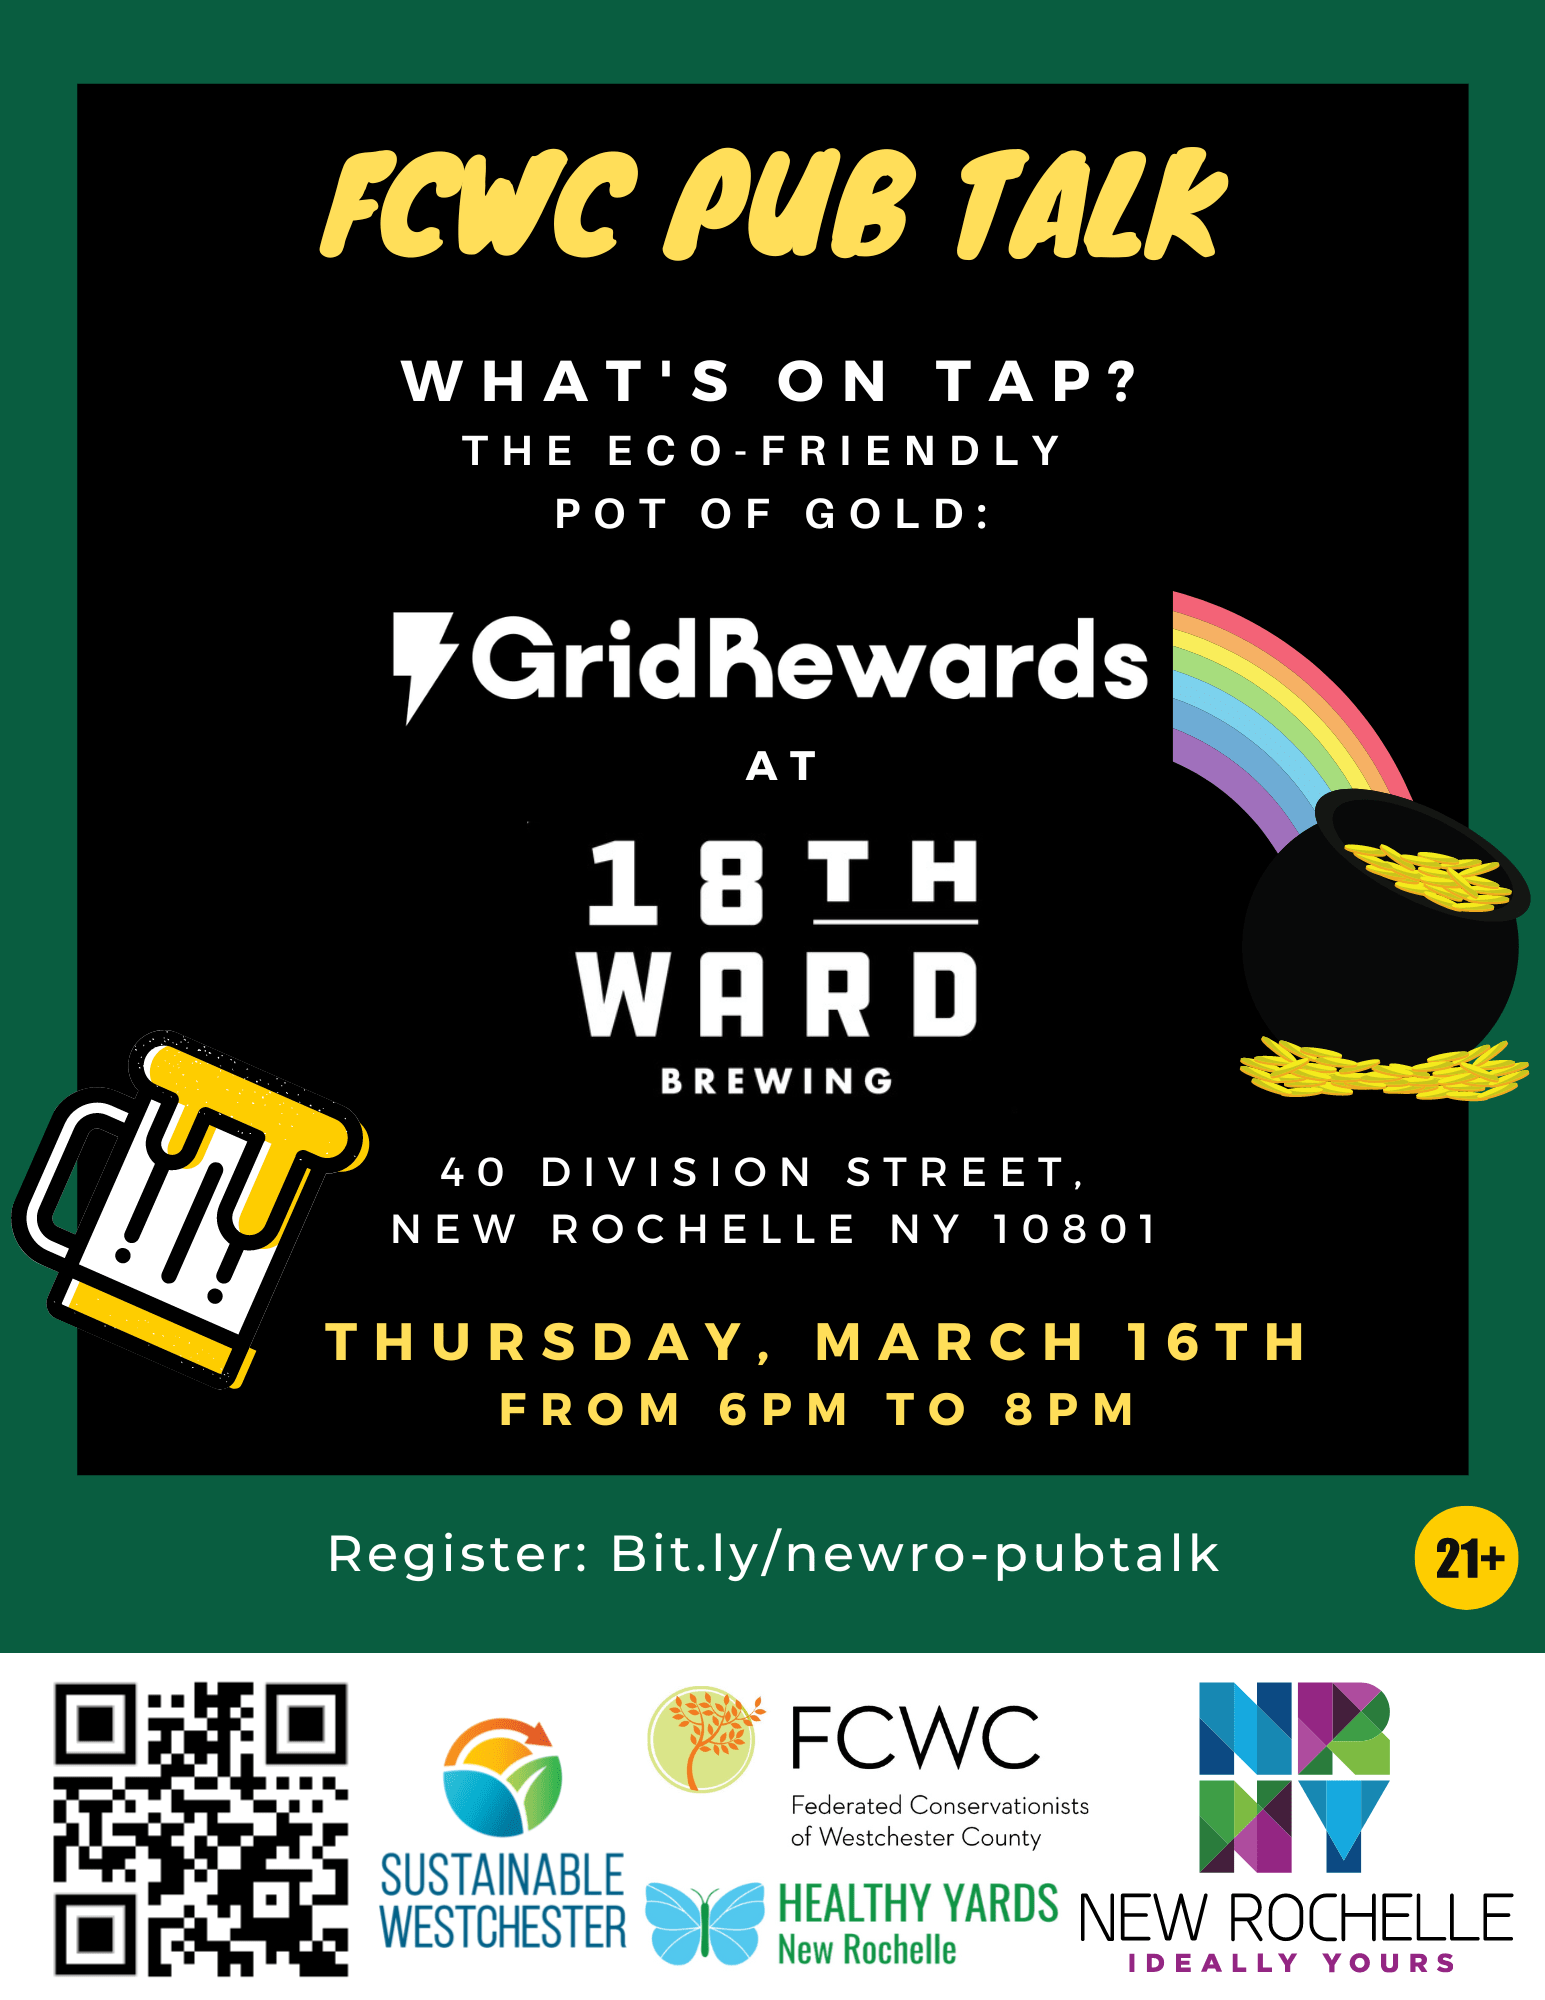 FCWC Pub Talk at 18th Ward Brewing – Thursday, March 16th from 6:00pm – 8:00pm